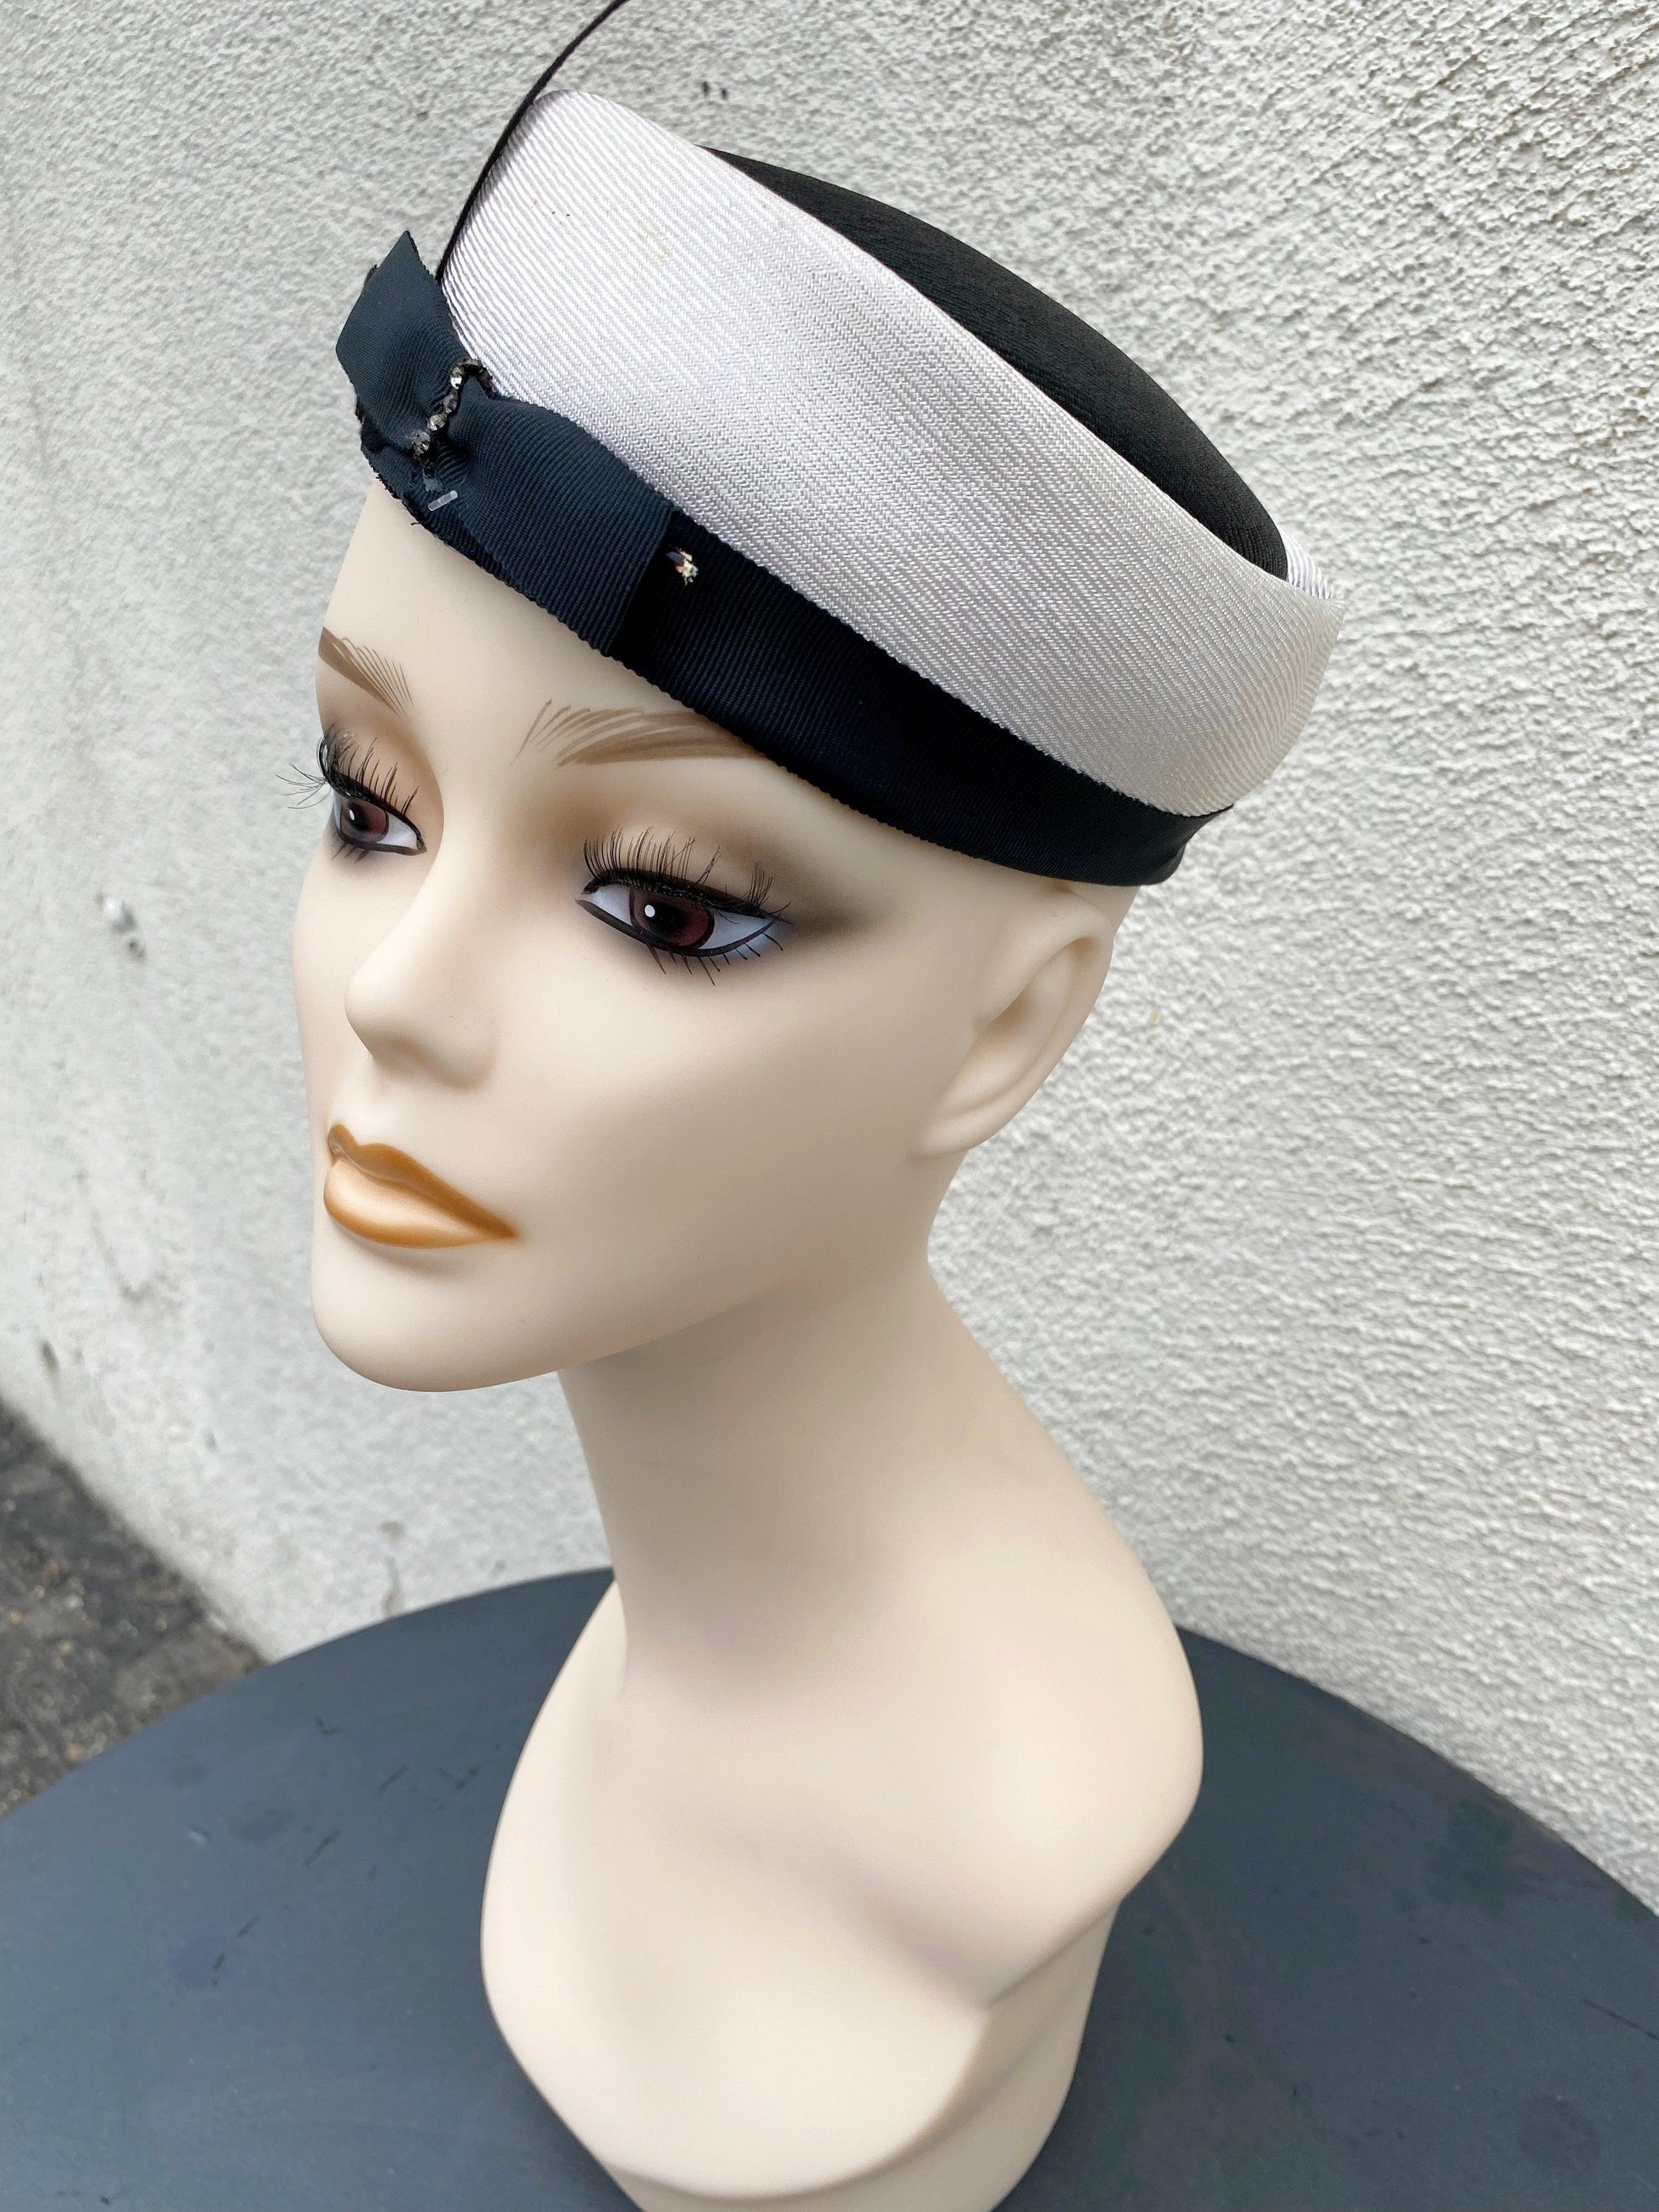 Vintage White with Black Trim Pillbox Hat with Feather - A Walk Thru Time Vintage